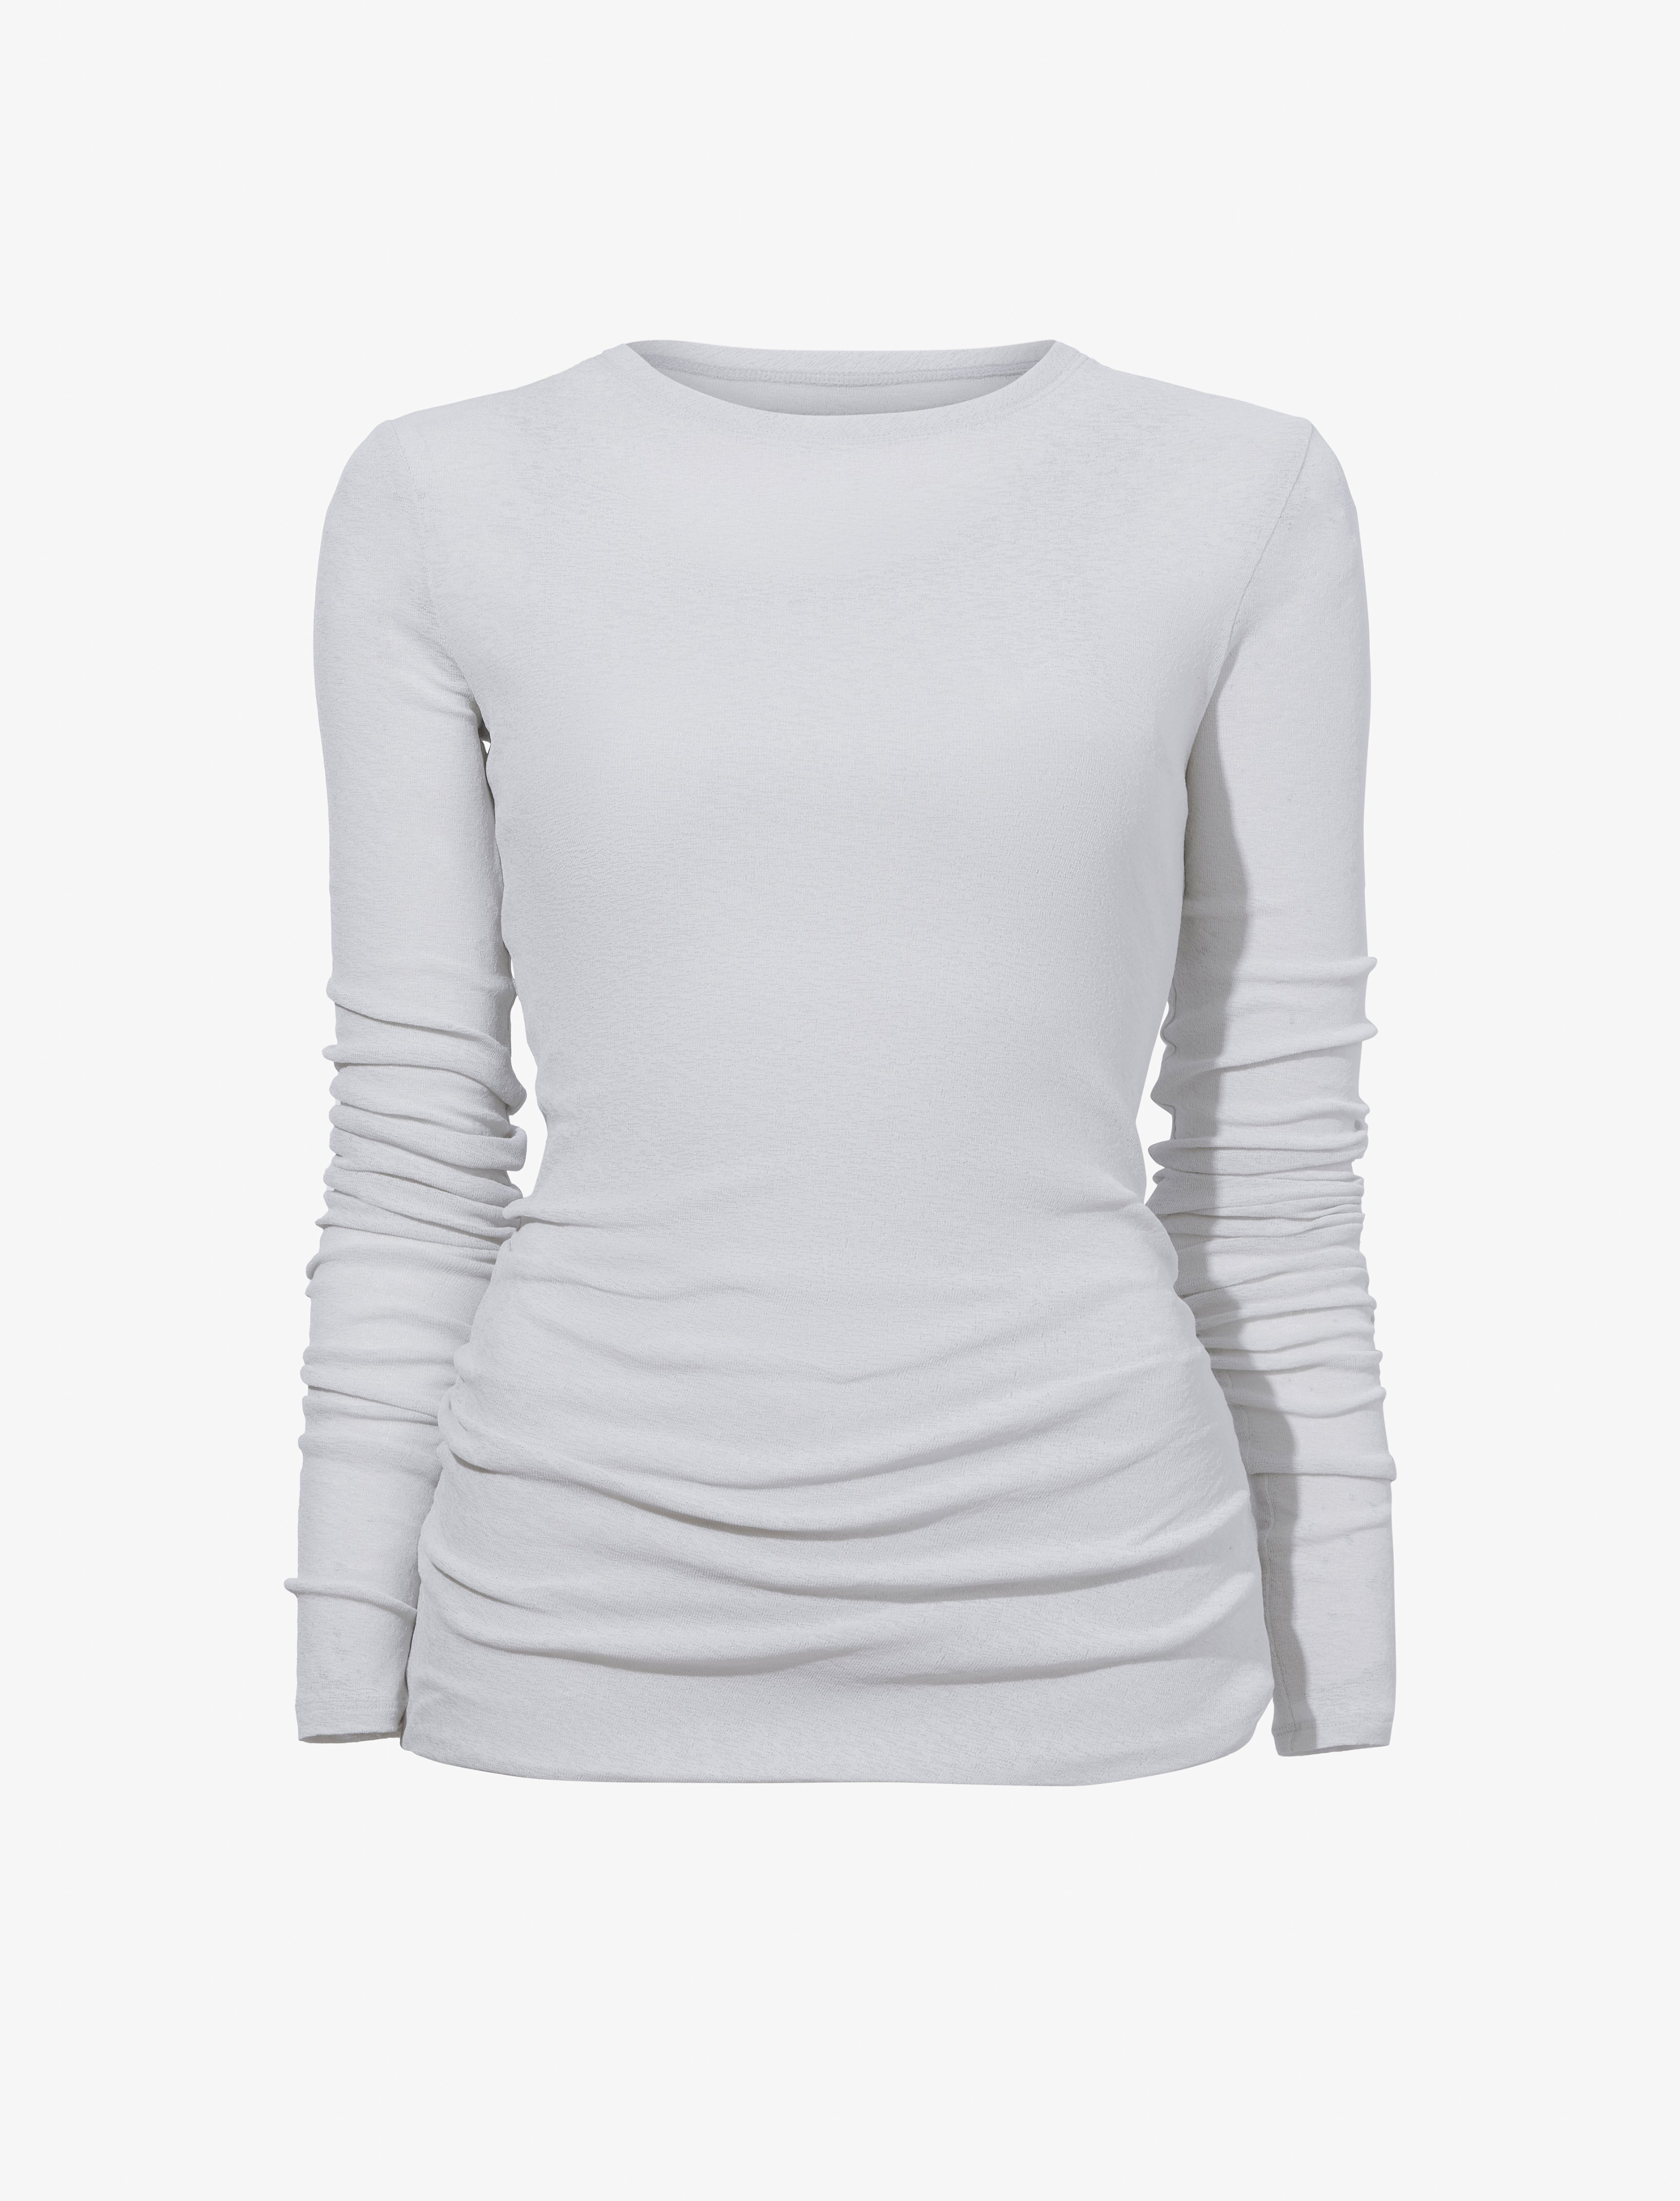 Roger Layered Top in Gauzy Jersey - 1